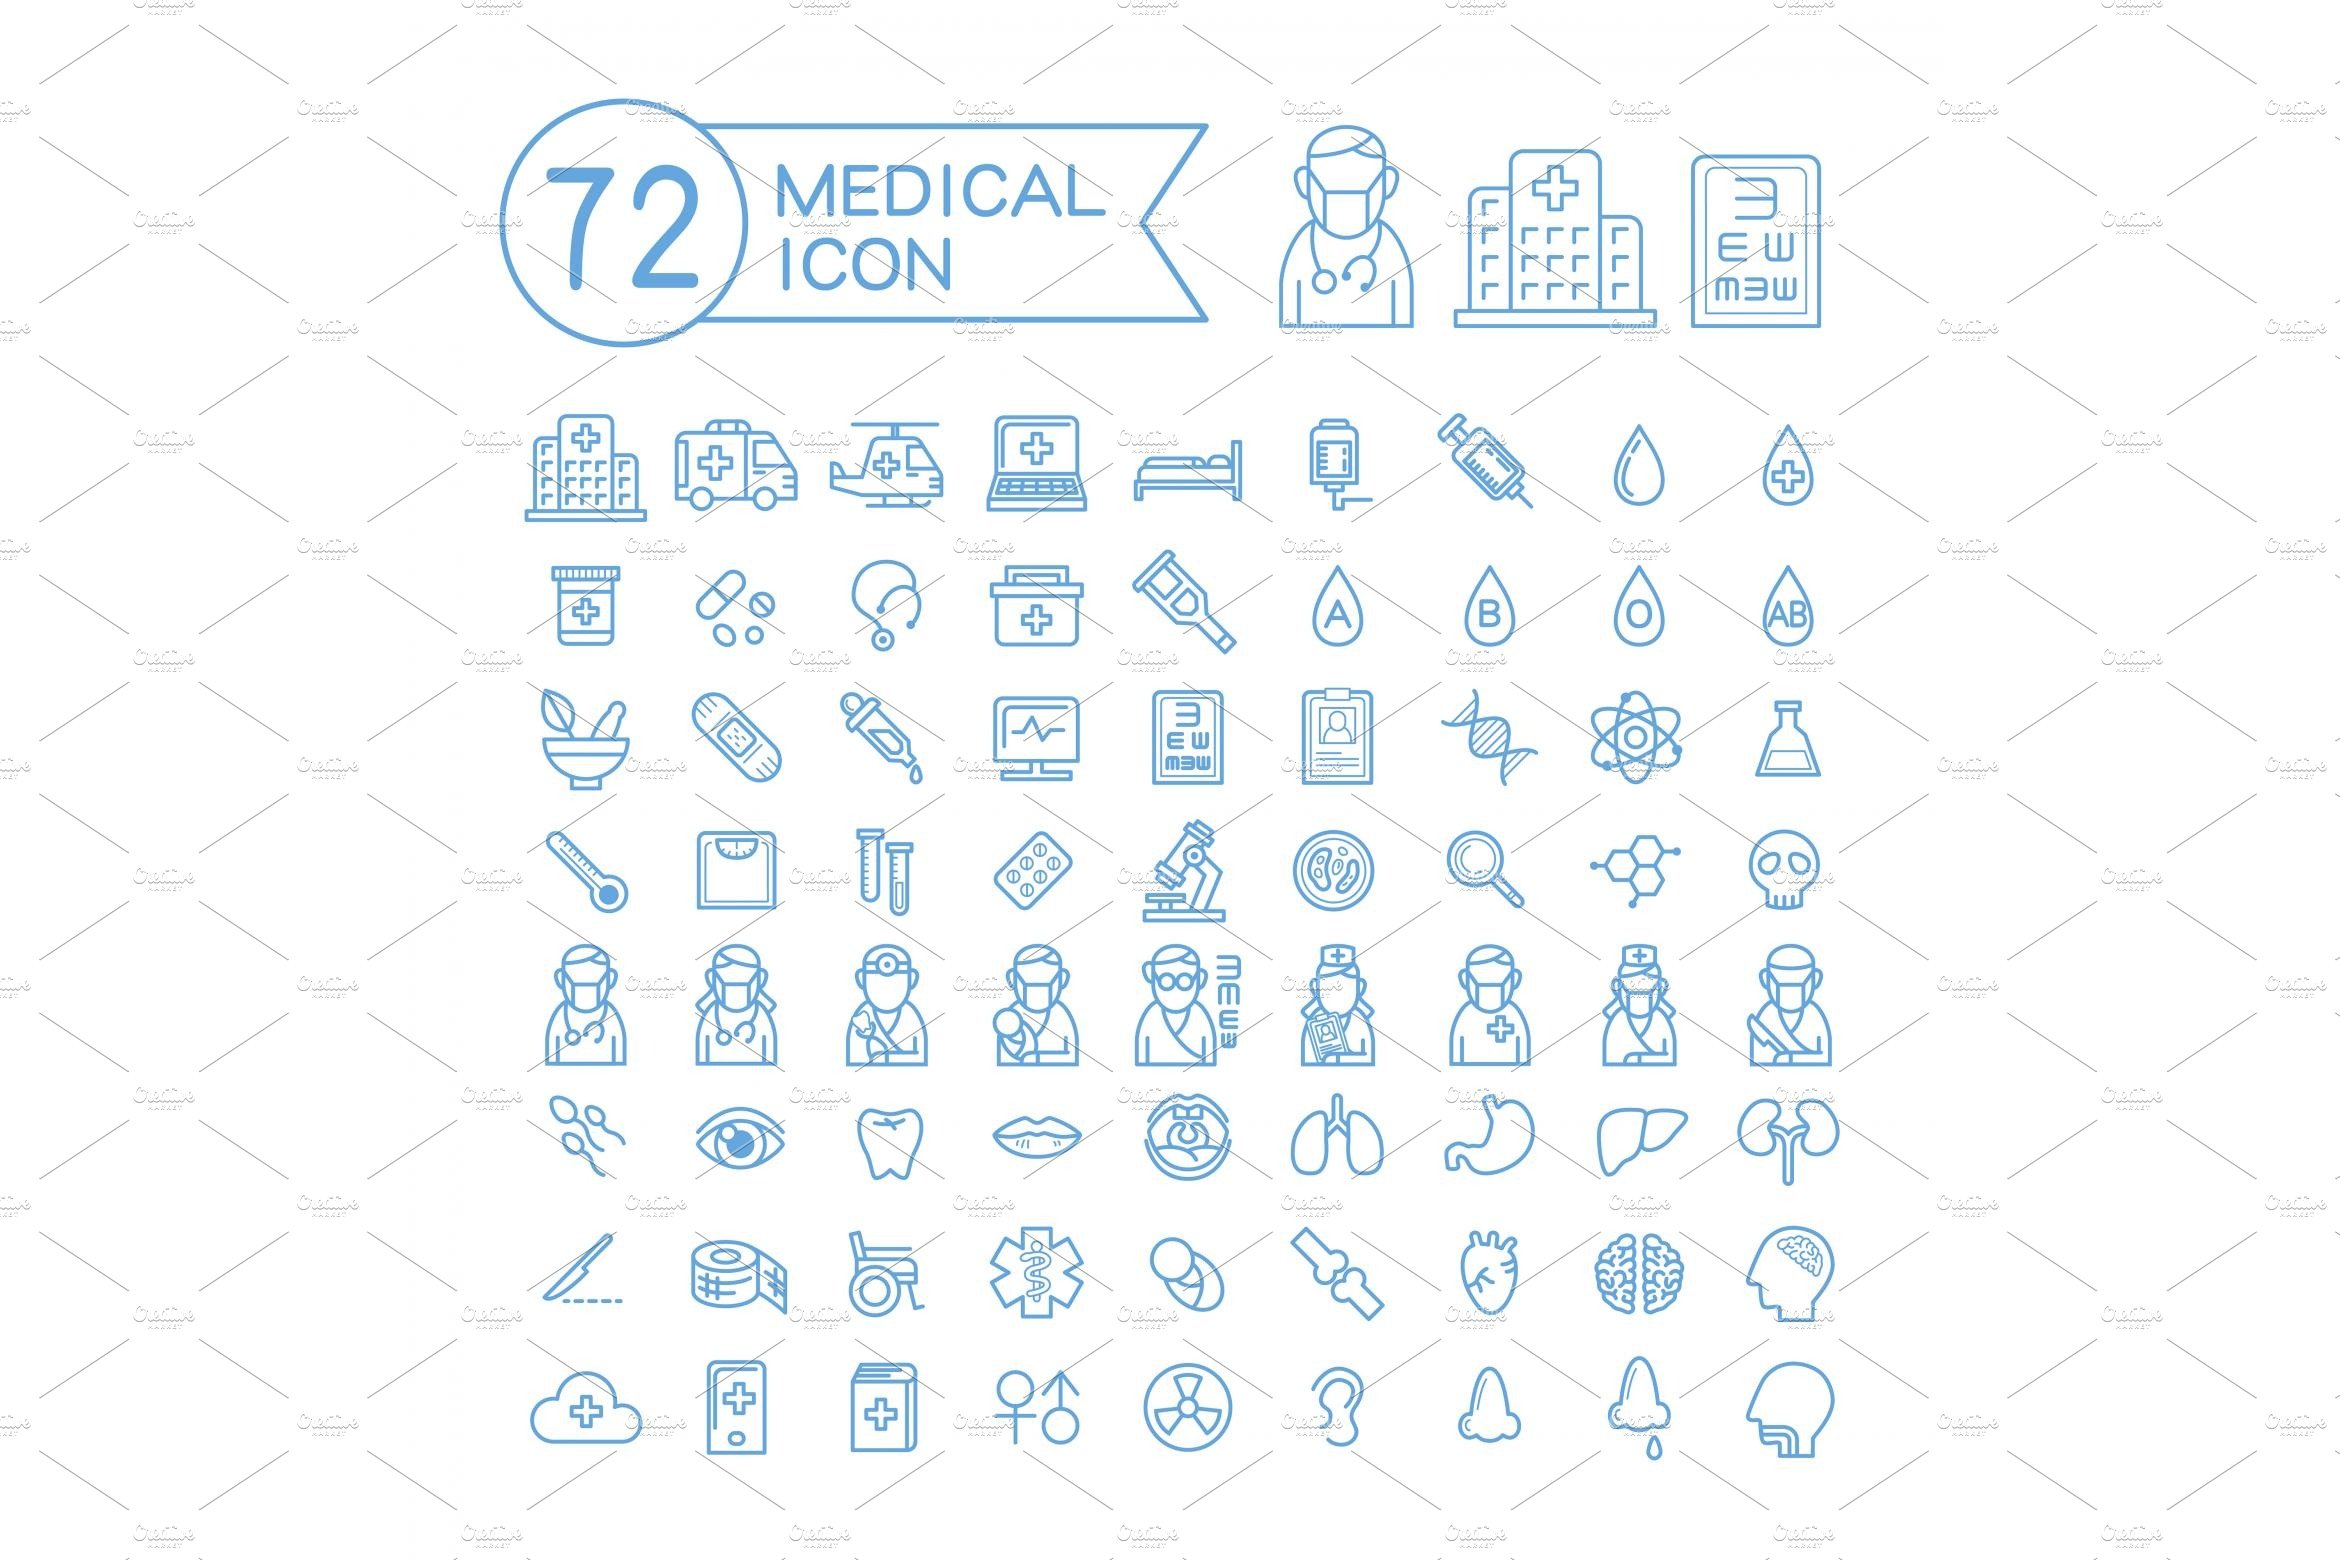 72 medical icons set cover image.